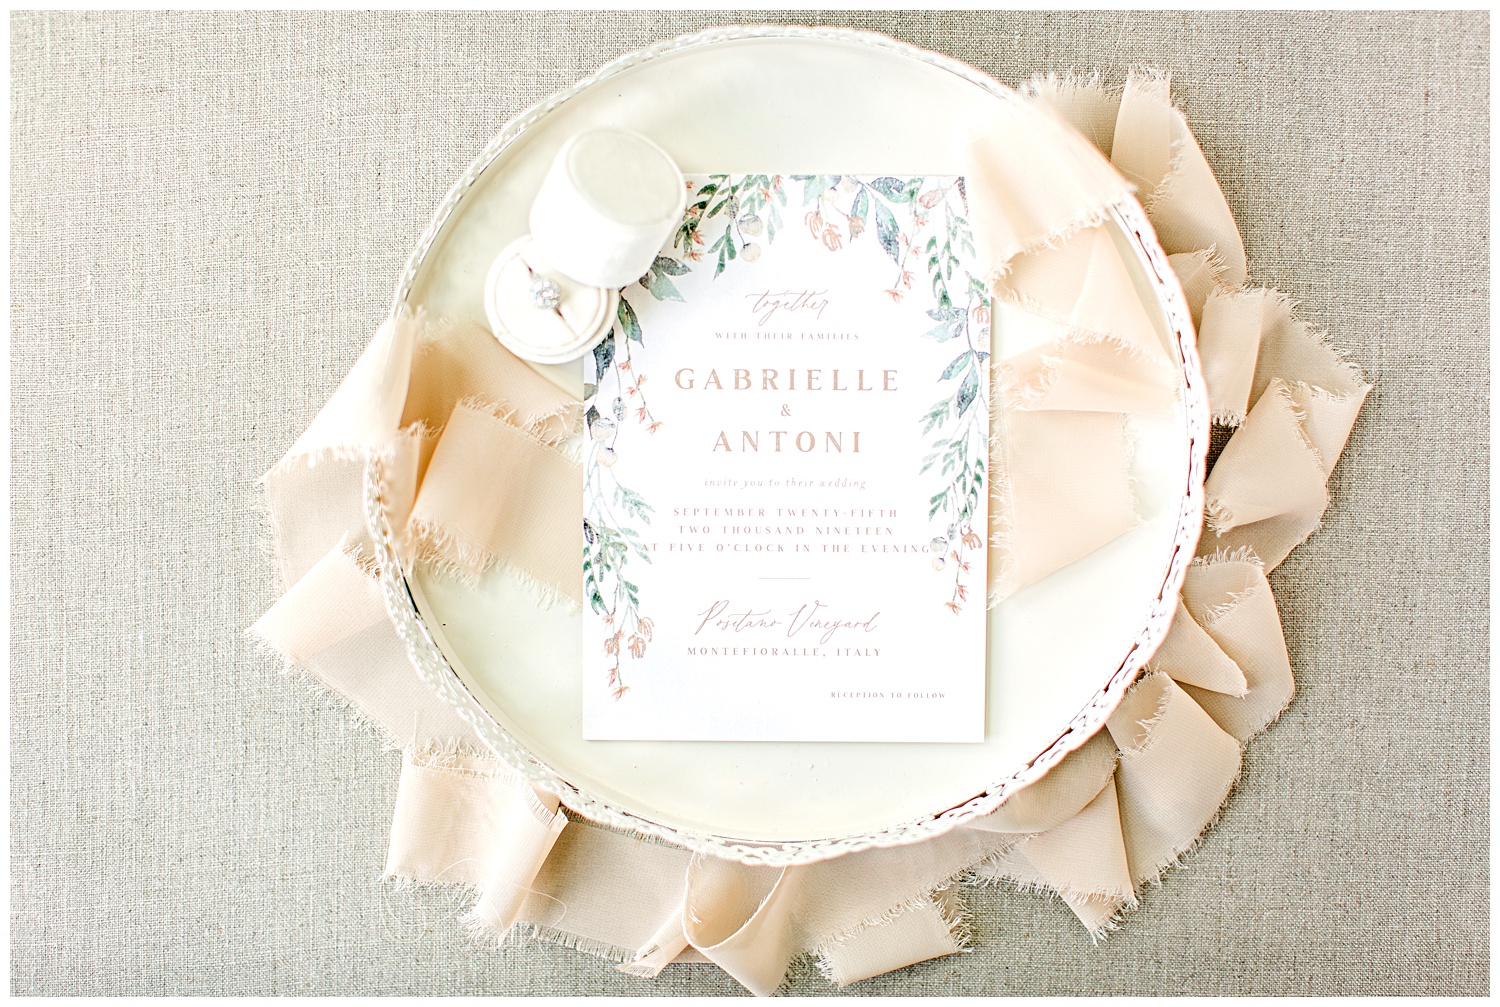 Peach, green and dusty blue watercolor floral wedding invitation from Elli beautifully styled on a cream decorative tray with a cream ring box and peach frayed edge ribbon.